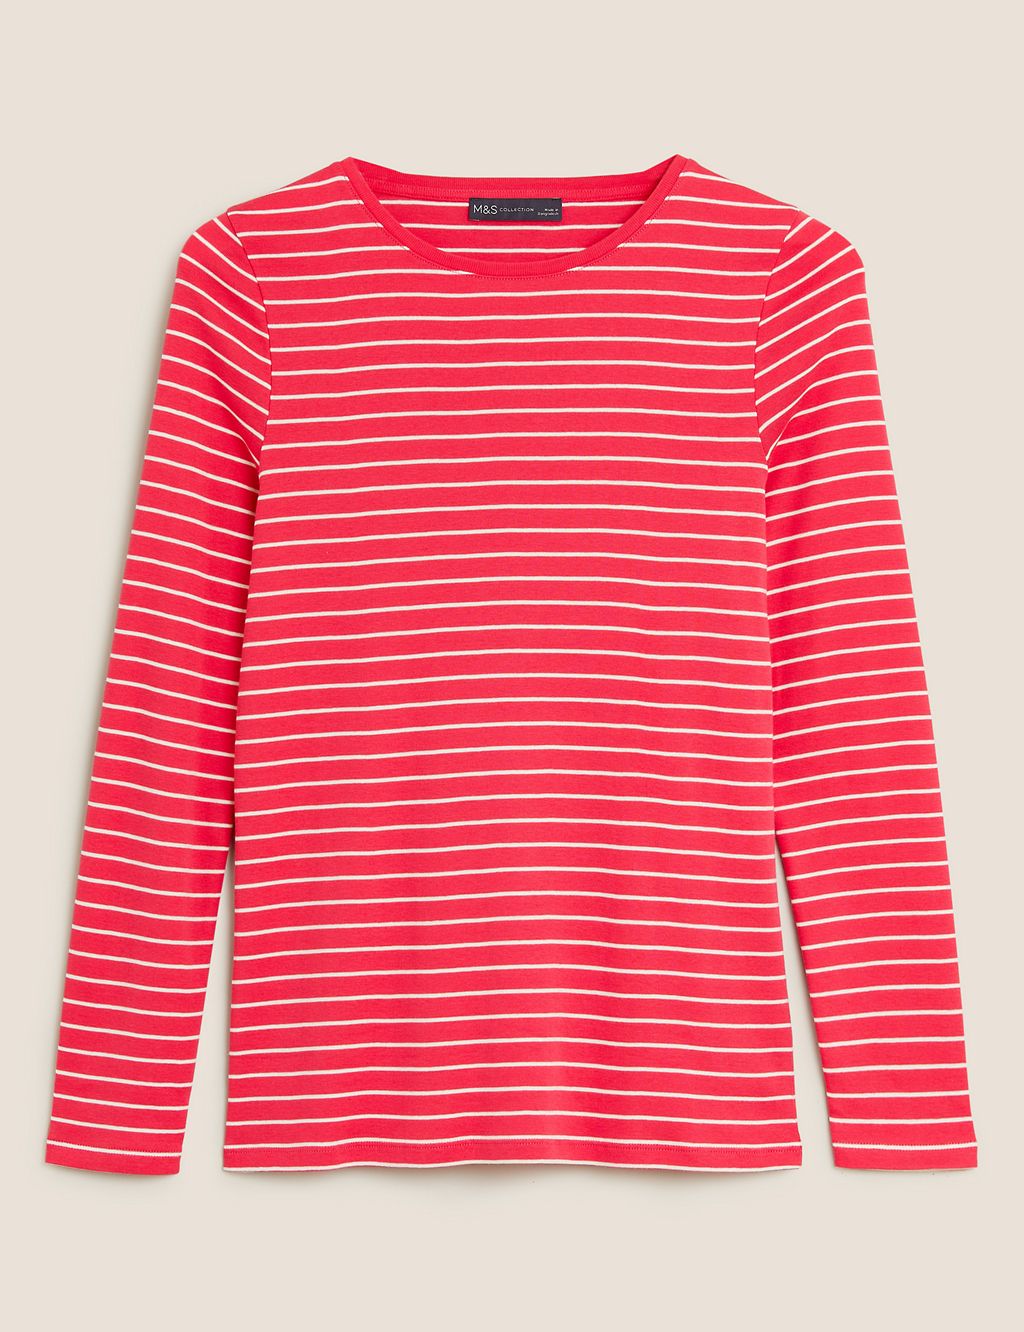 Pure Cotton Regular Fit Long Sleeve Top | M&S Collection | M&S